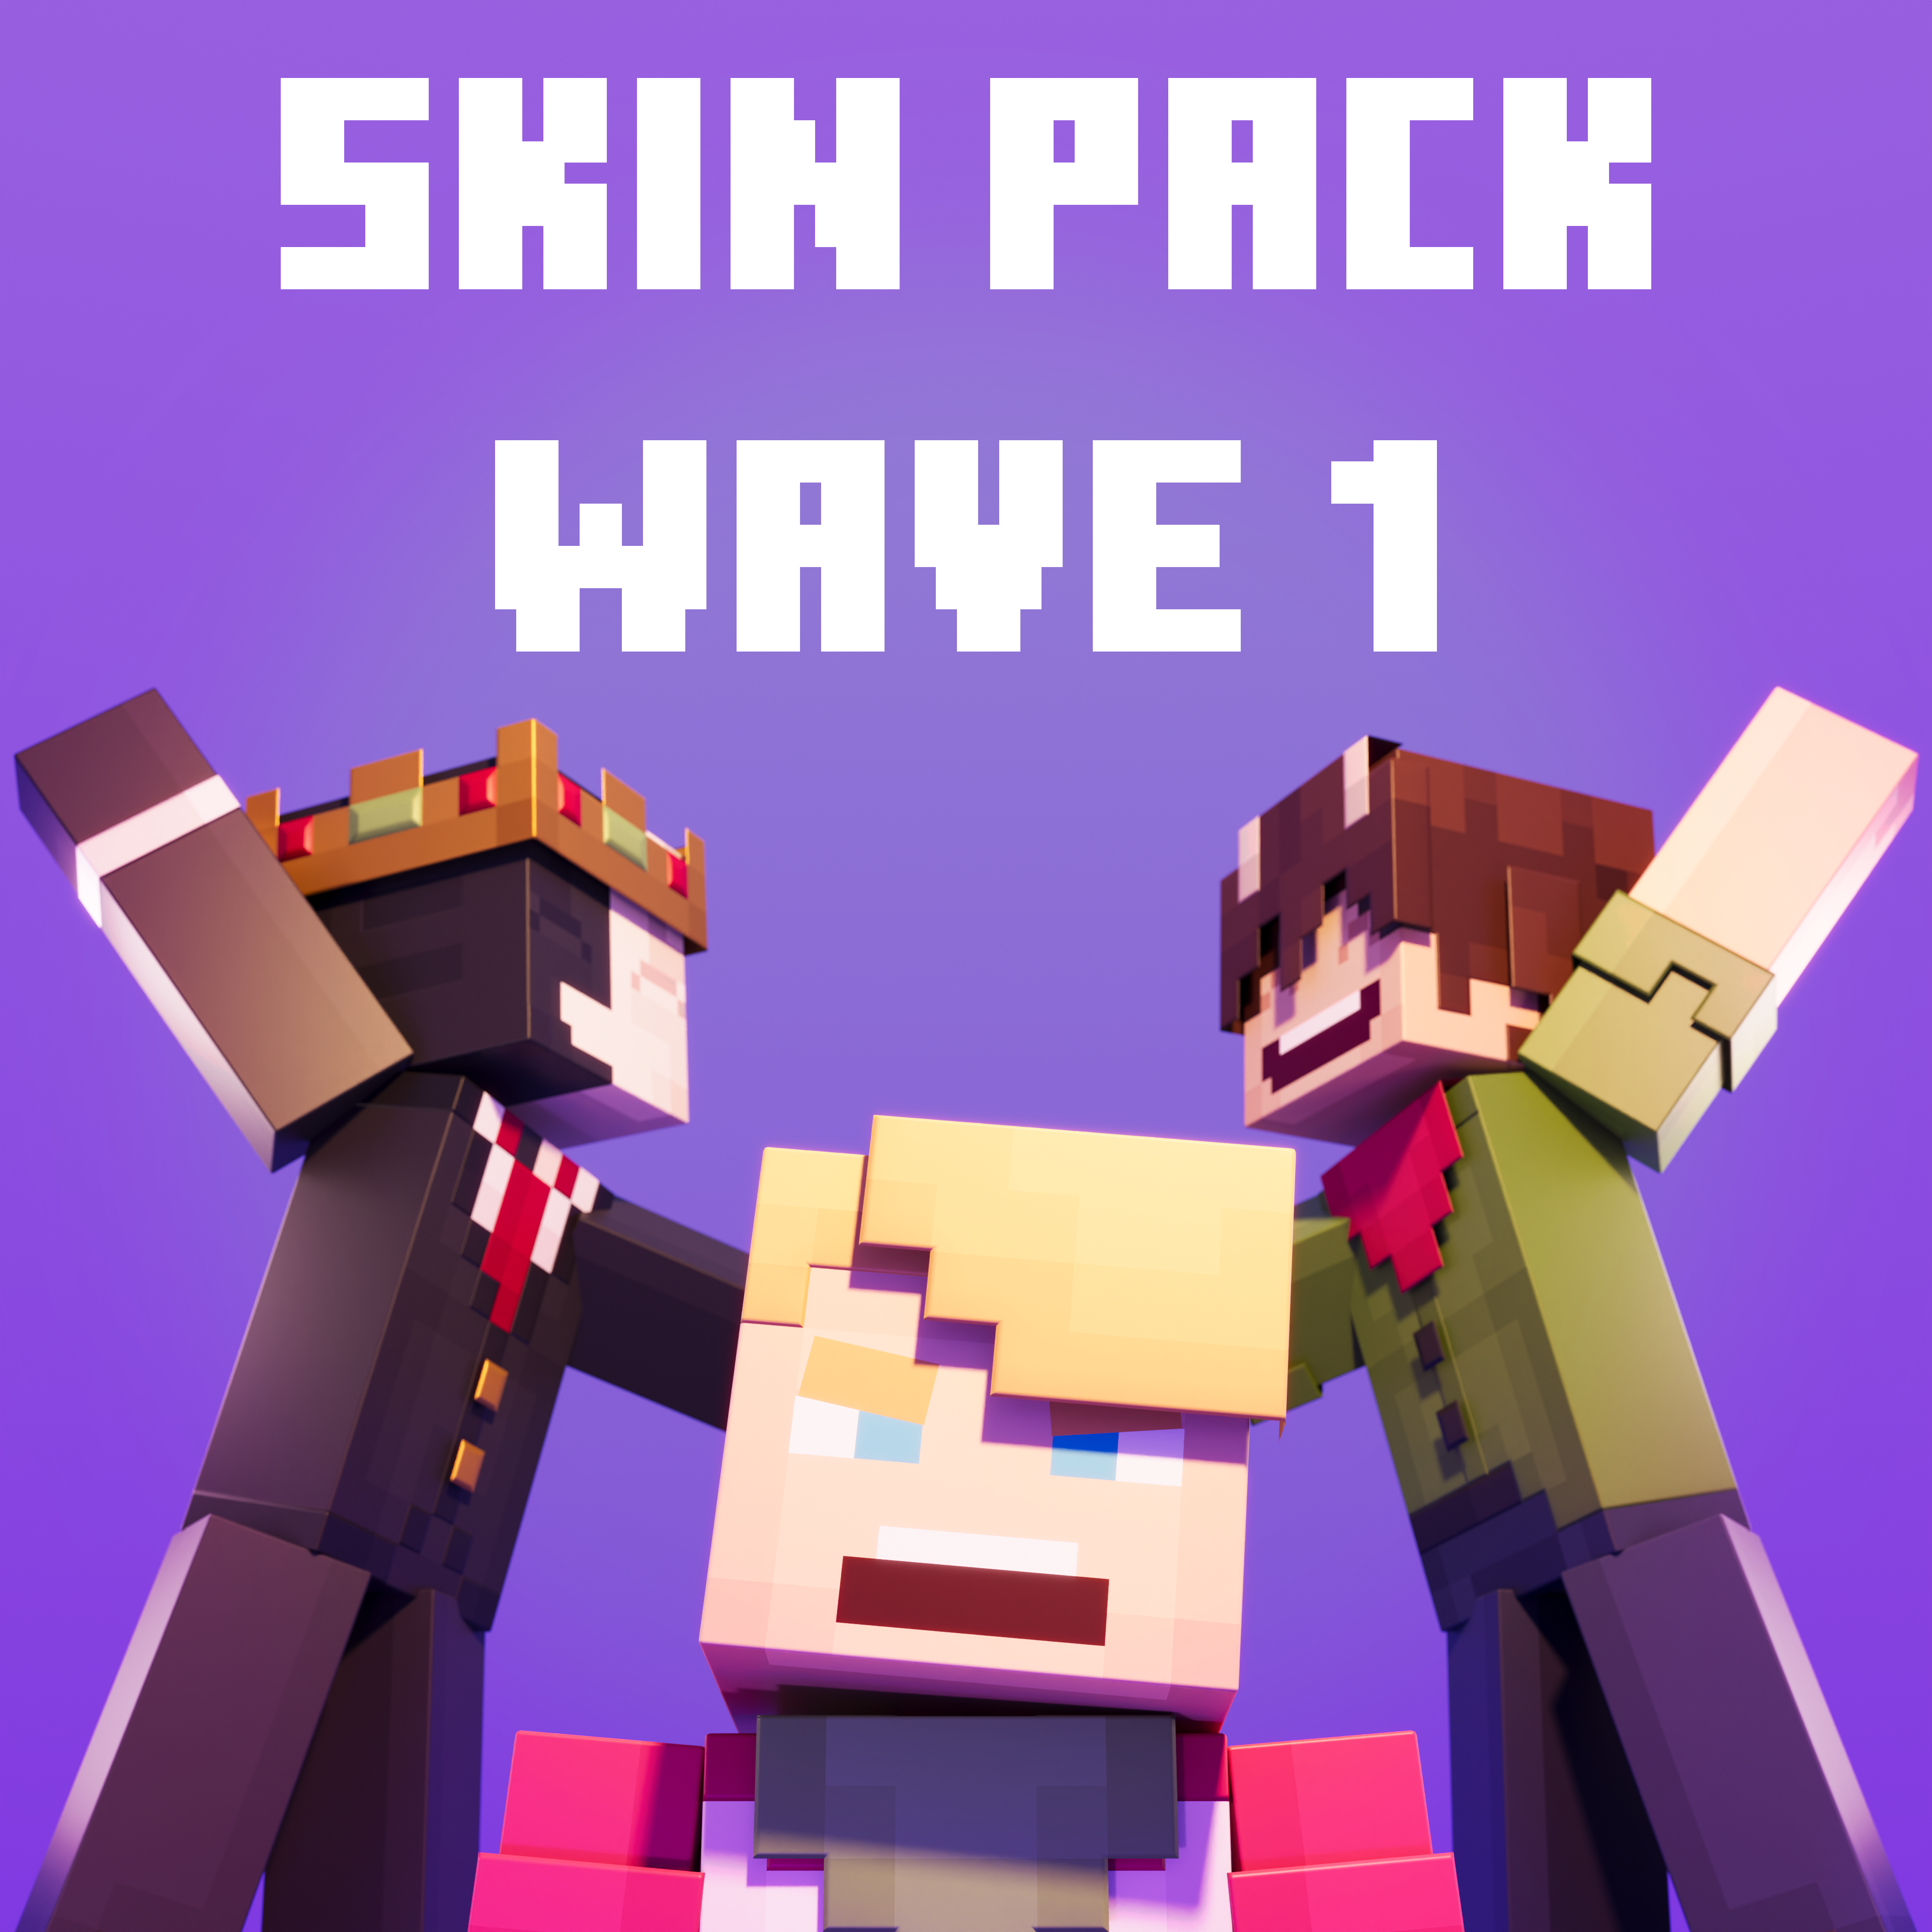 The Dream SMP Pack